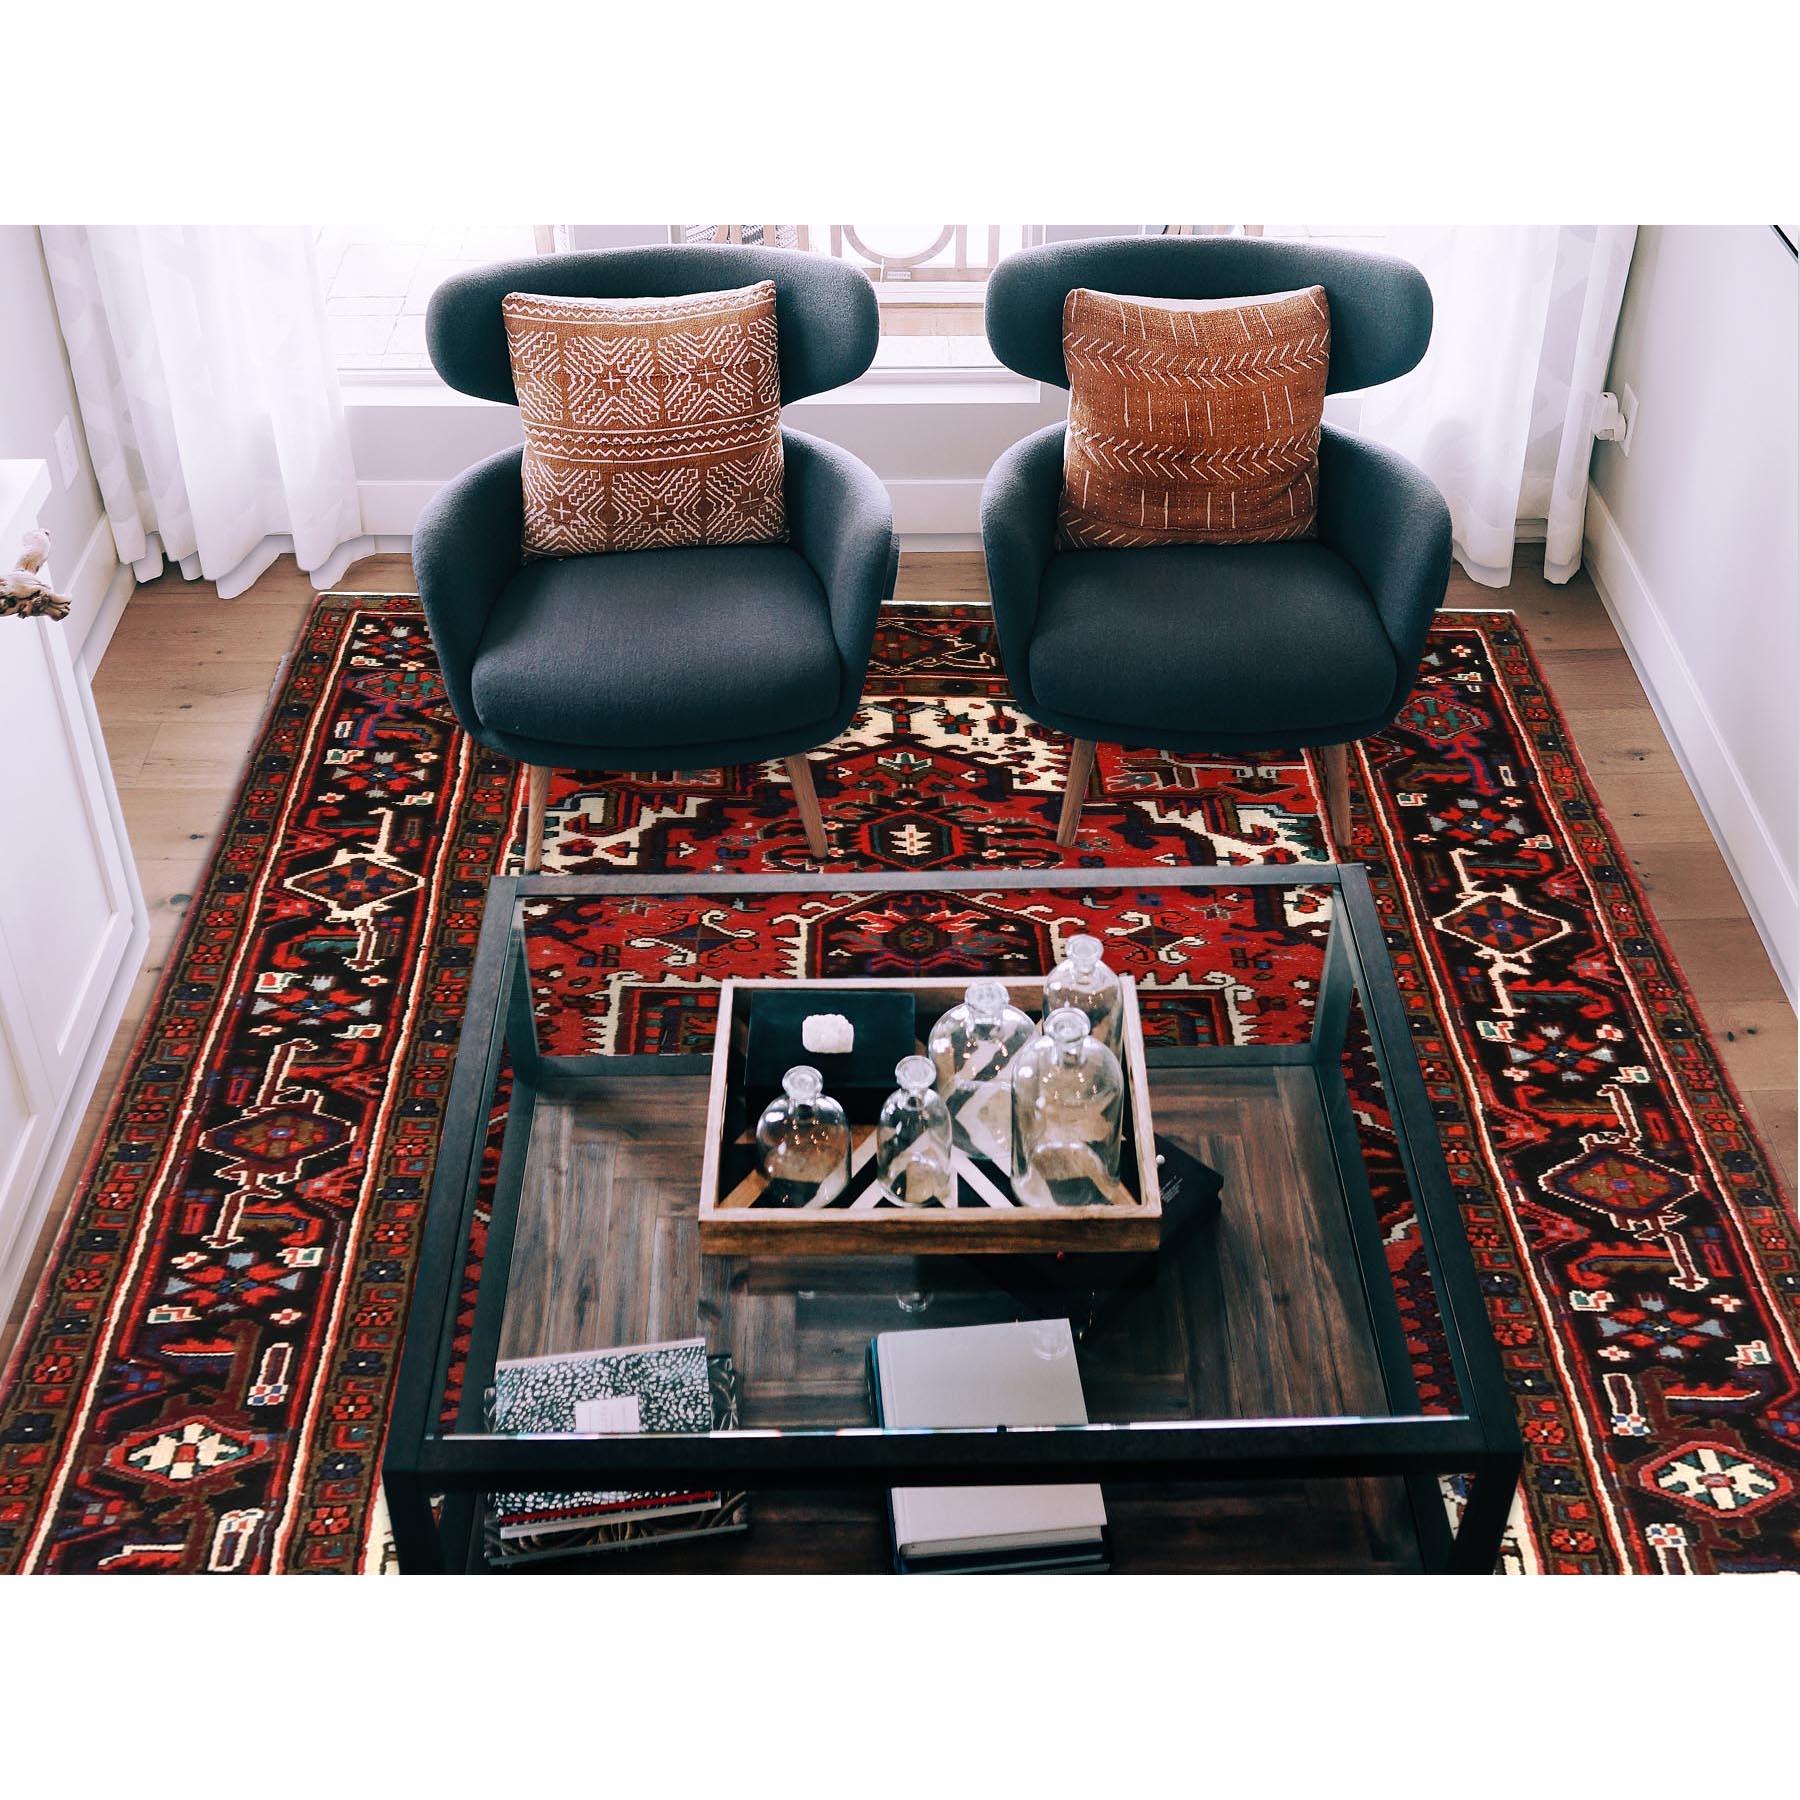 This fabulous Hand-Knotted carpet has been created and designed for extra strength and durability. This rug has been handcrafted for weeks in the traditional method that is used to make
Exact Rug Size in Feet and Inches : 6'8